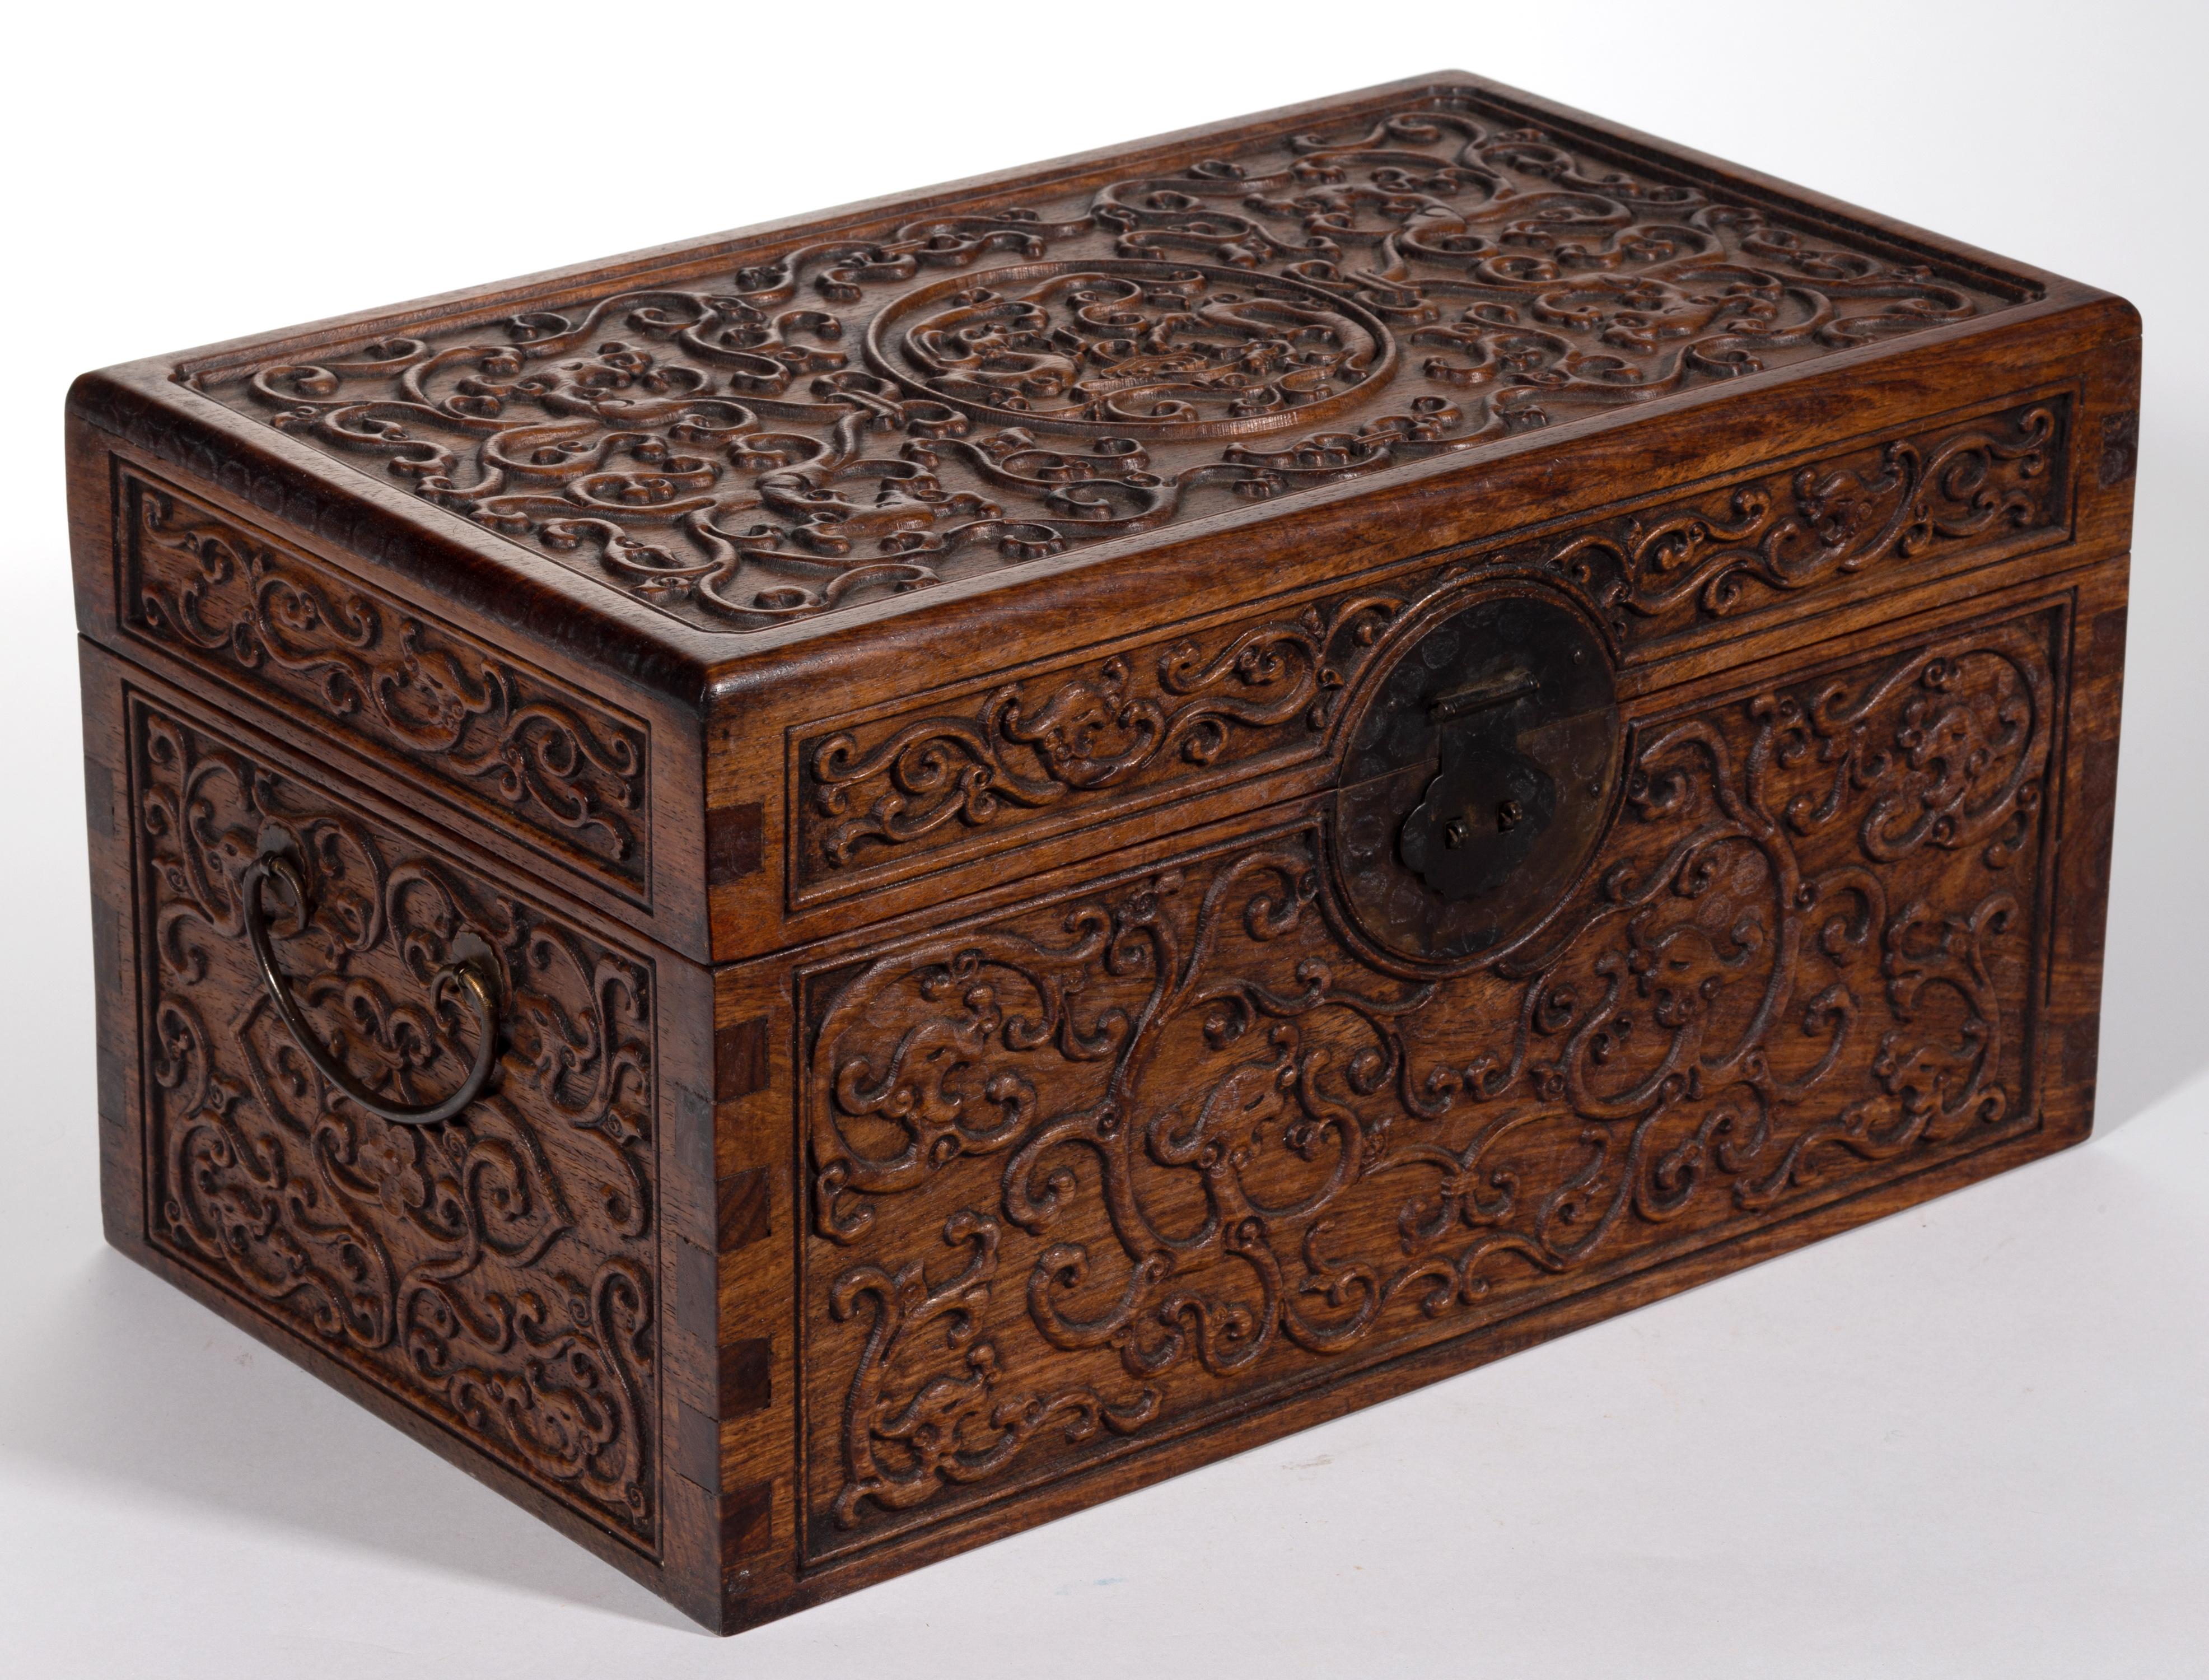 A Chinese rosewood Huanghuali document box with brass hardware including handles and lock latch. The surface of the box is finely carved in low relief of scrolling clouds and dragons. On the top surface, a roundel of double dragon design was placed